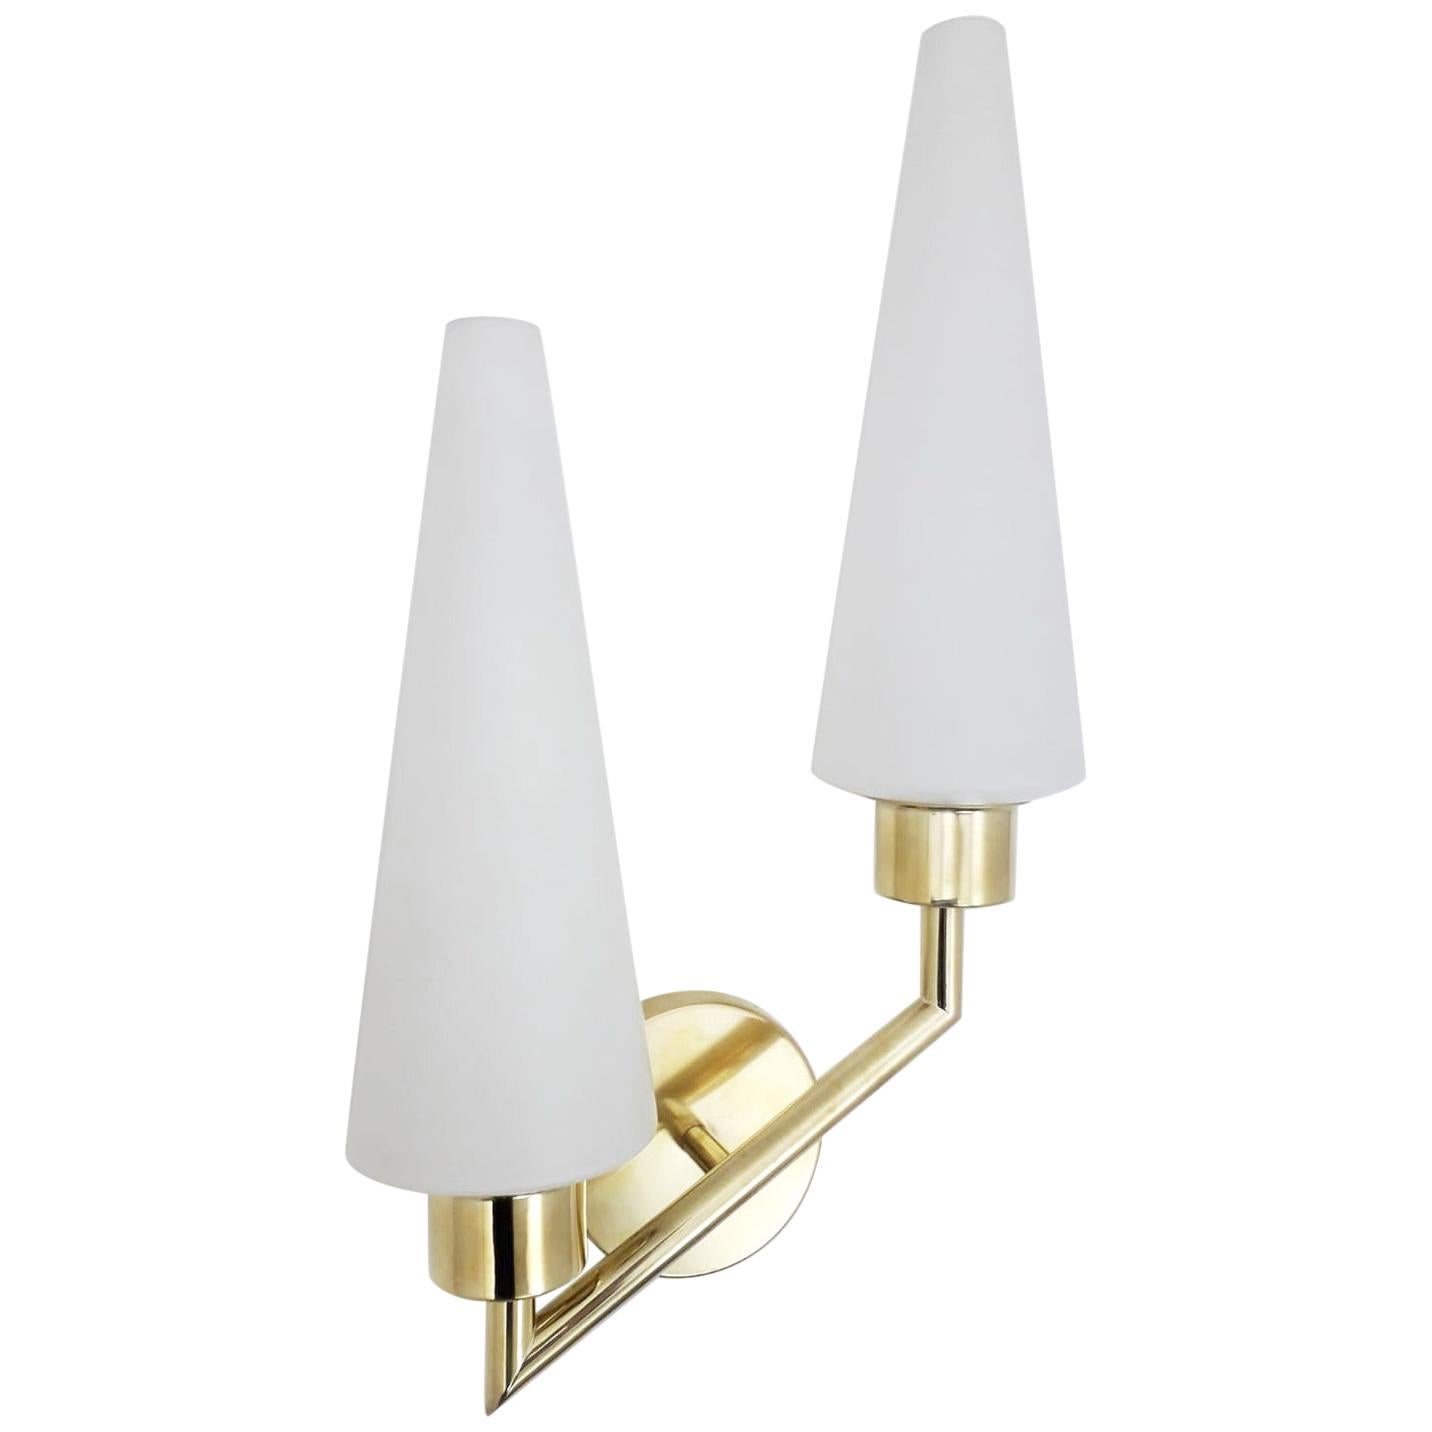 Midcentury Double Cone Stilnovo Sconce - 10 available For Sale